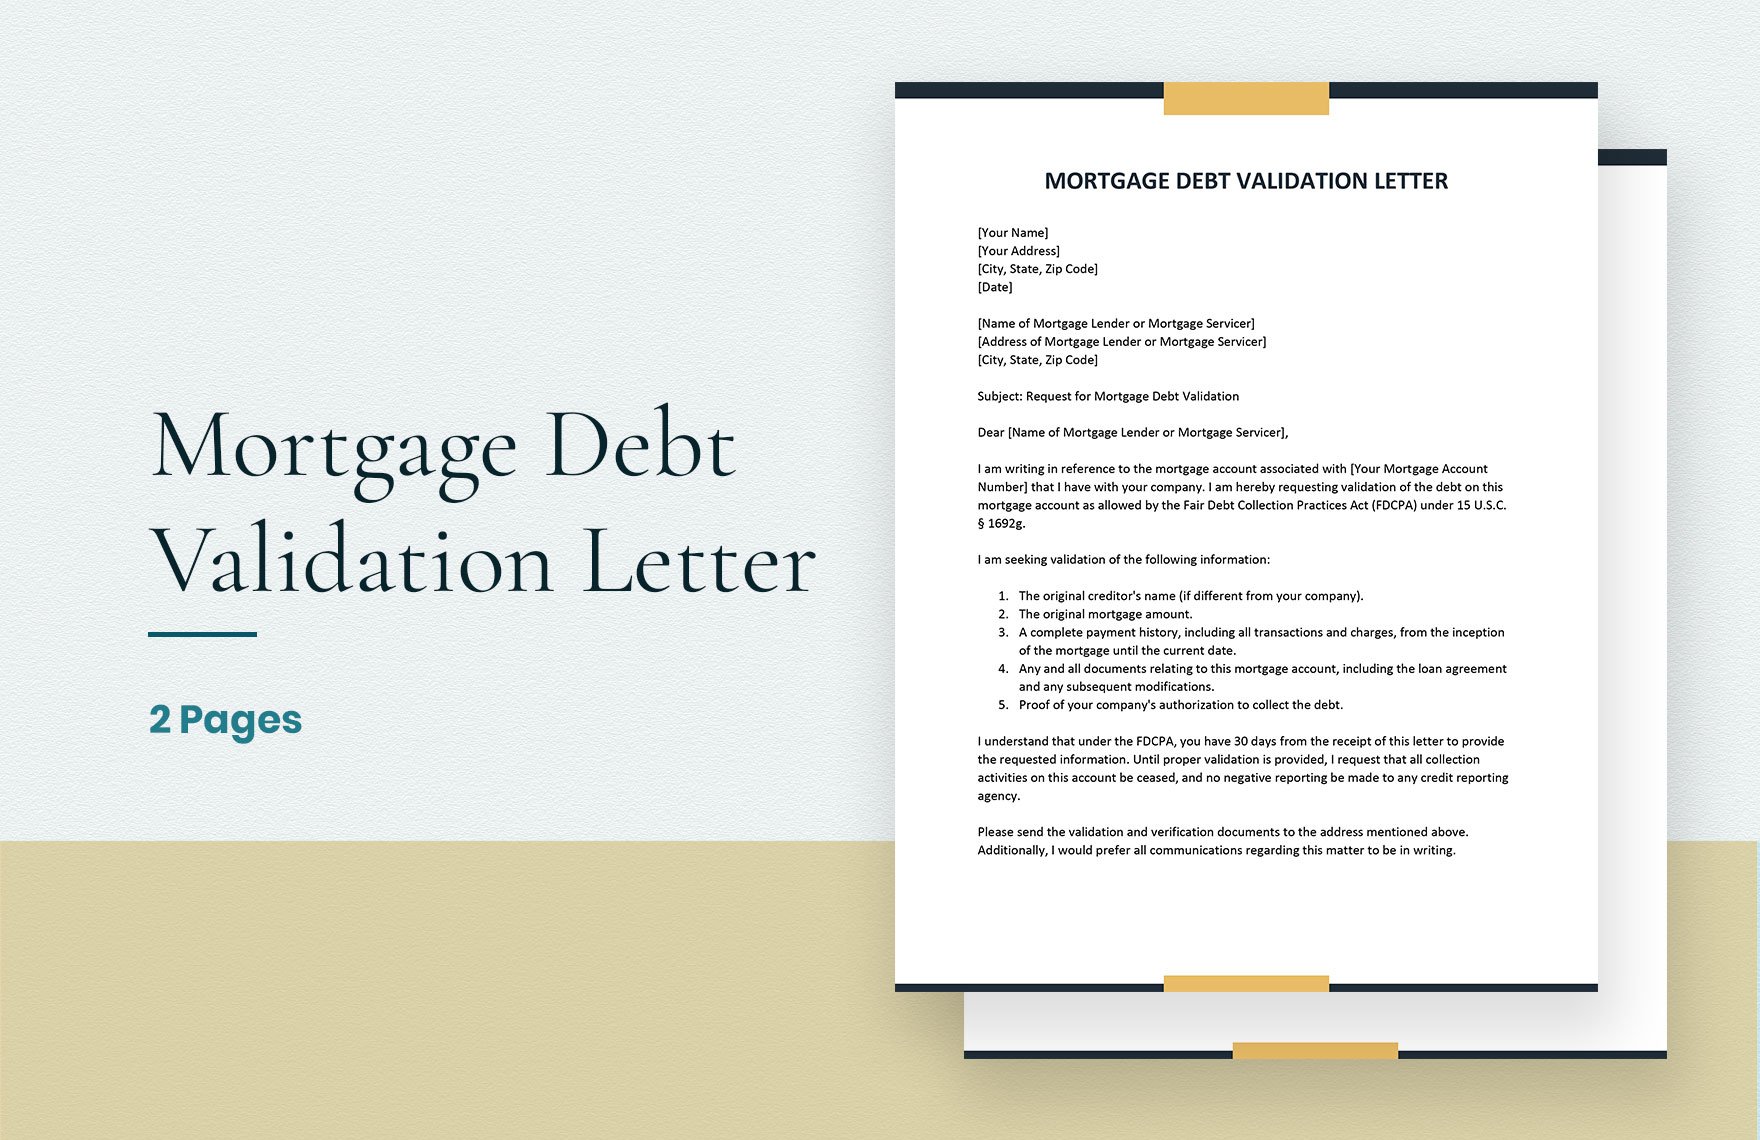 Mortgage Debt Validation Letter in Word, Google Docs, Apple Pages